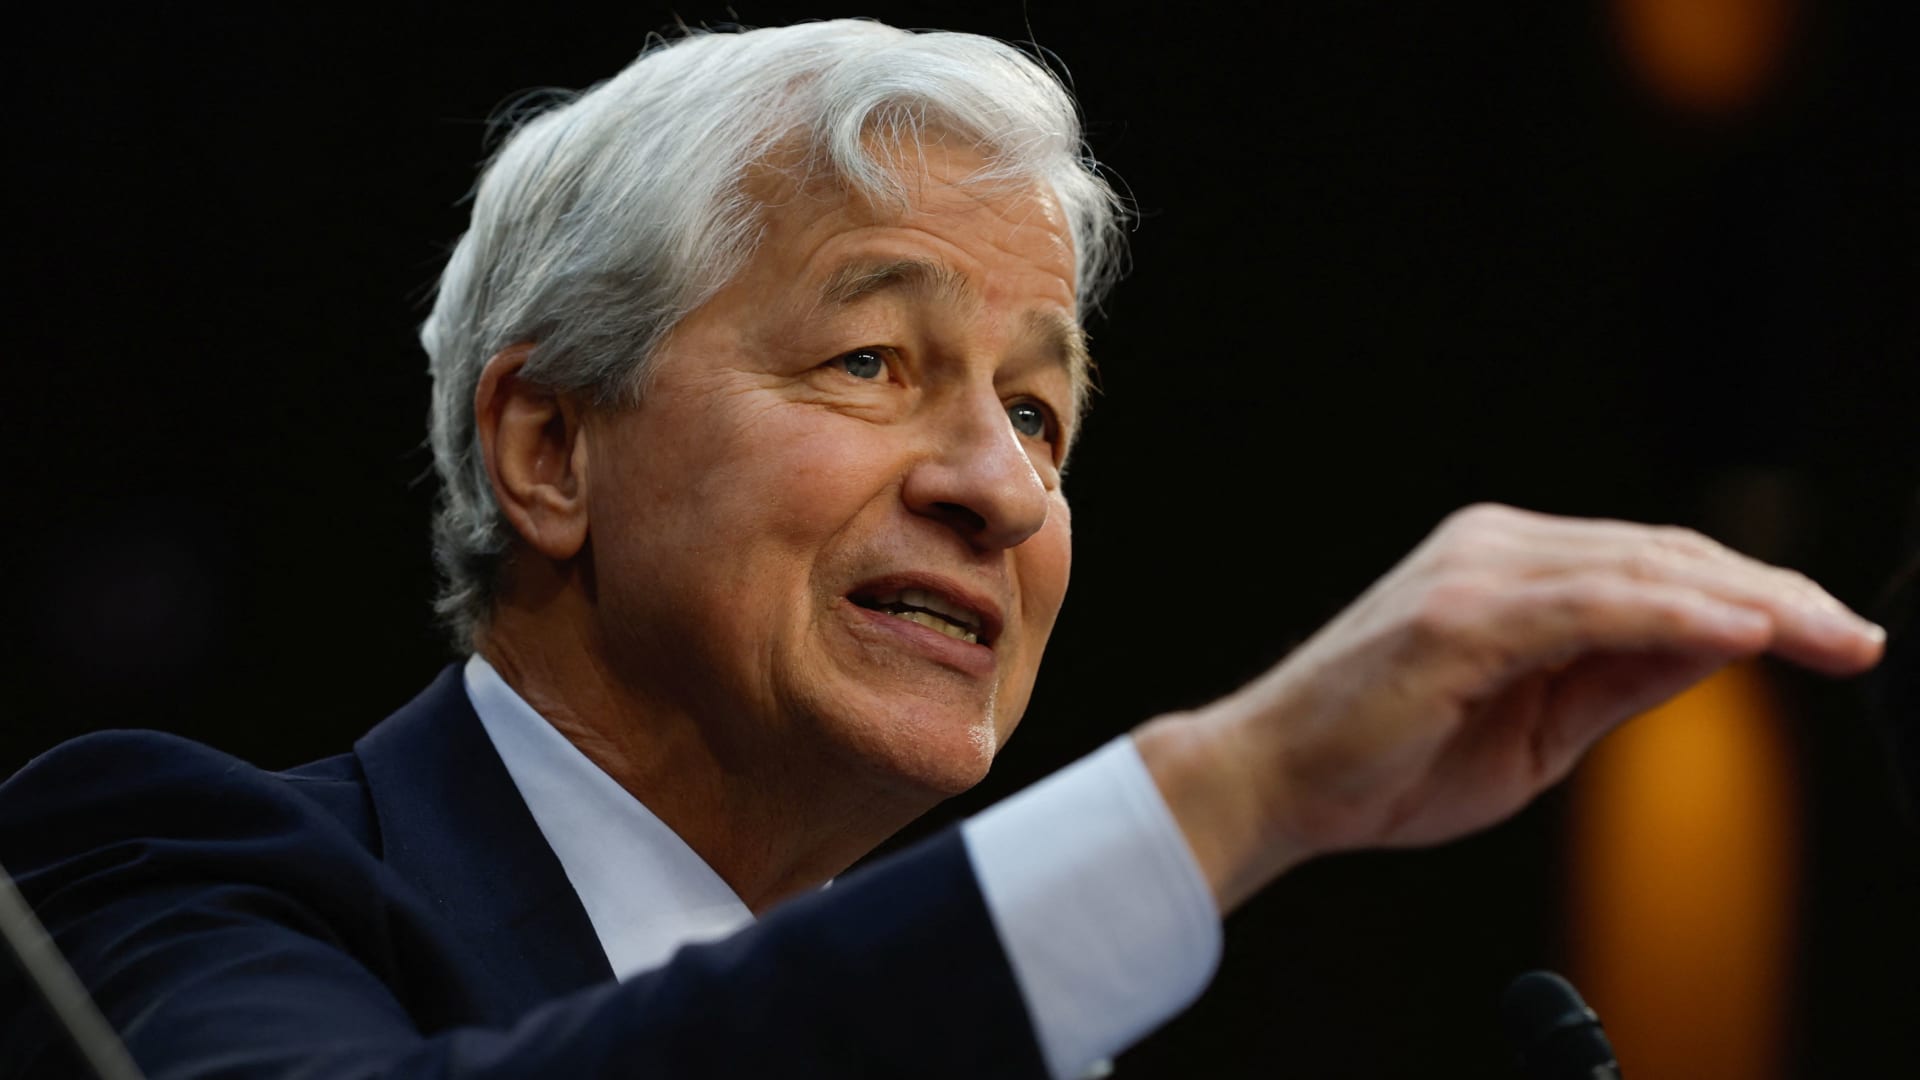 Jamie Dimon warns that inflation, wars and Fed policy pose major threats ahead